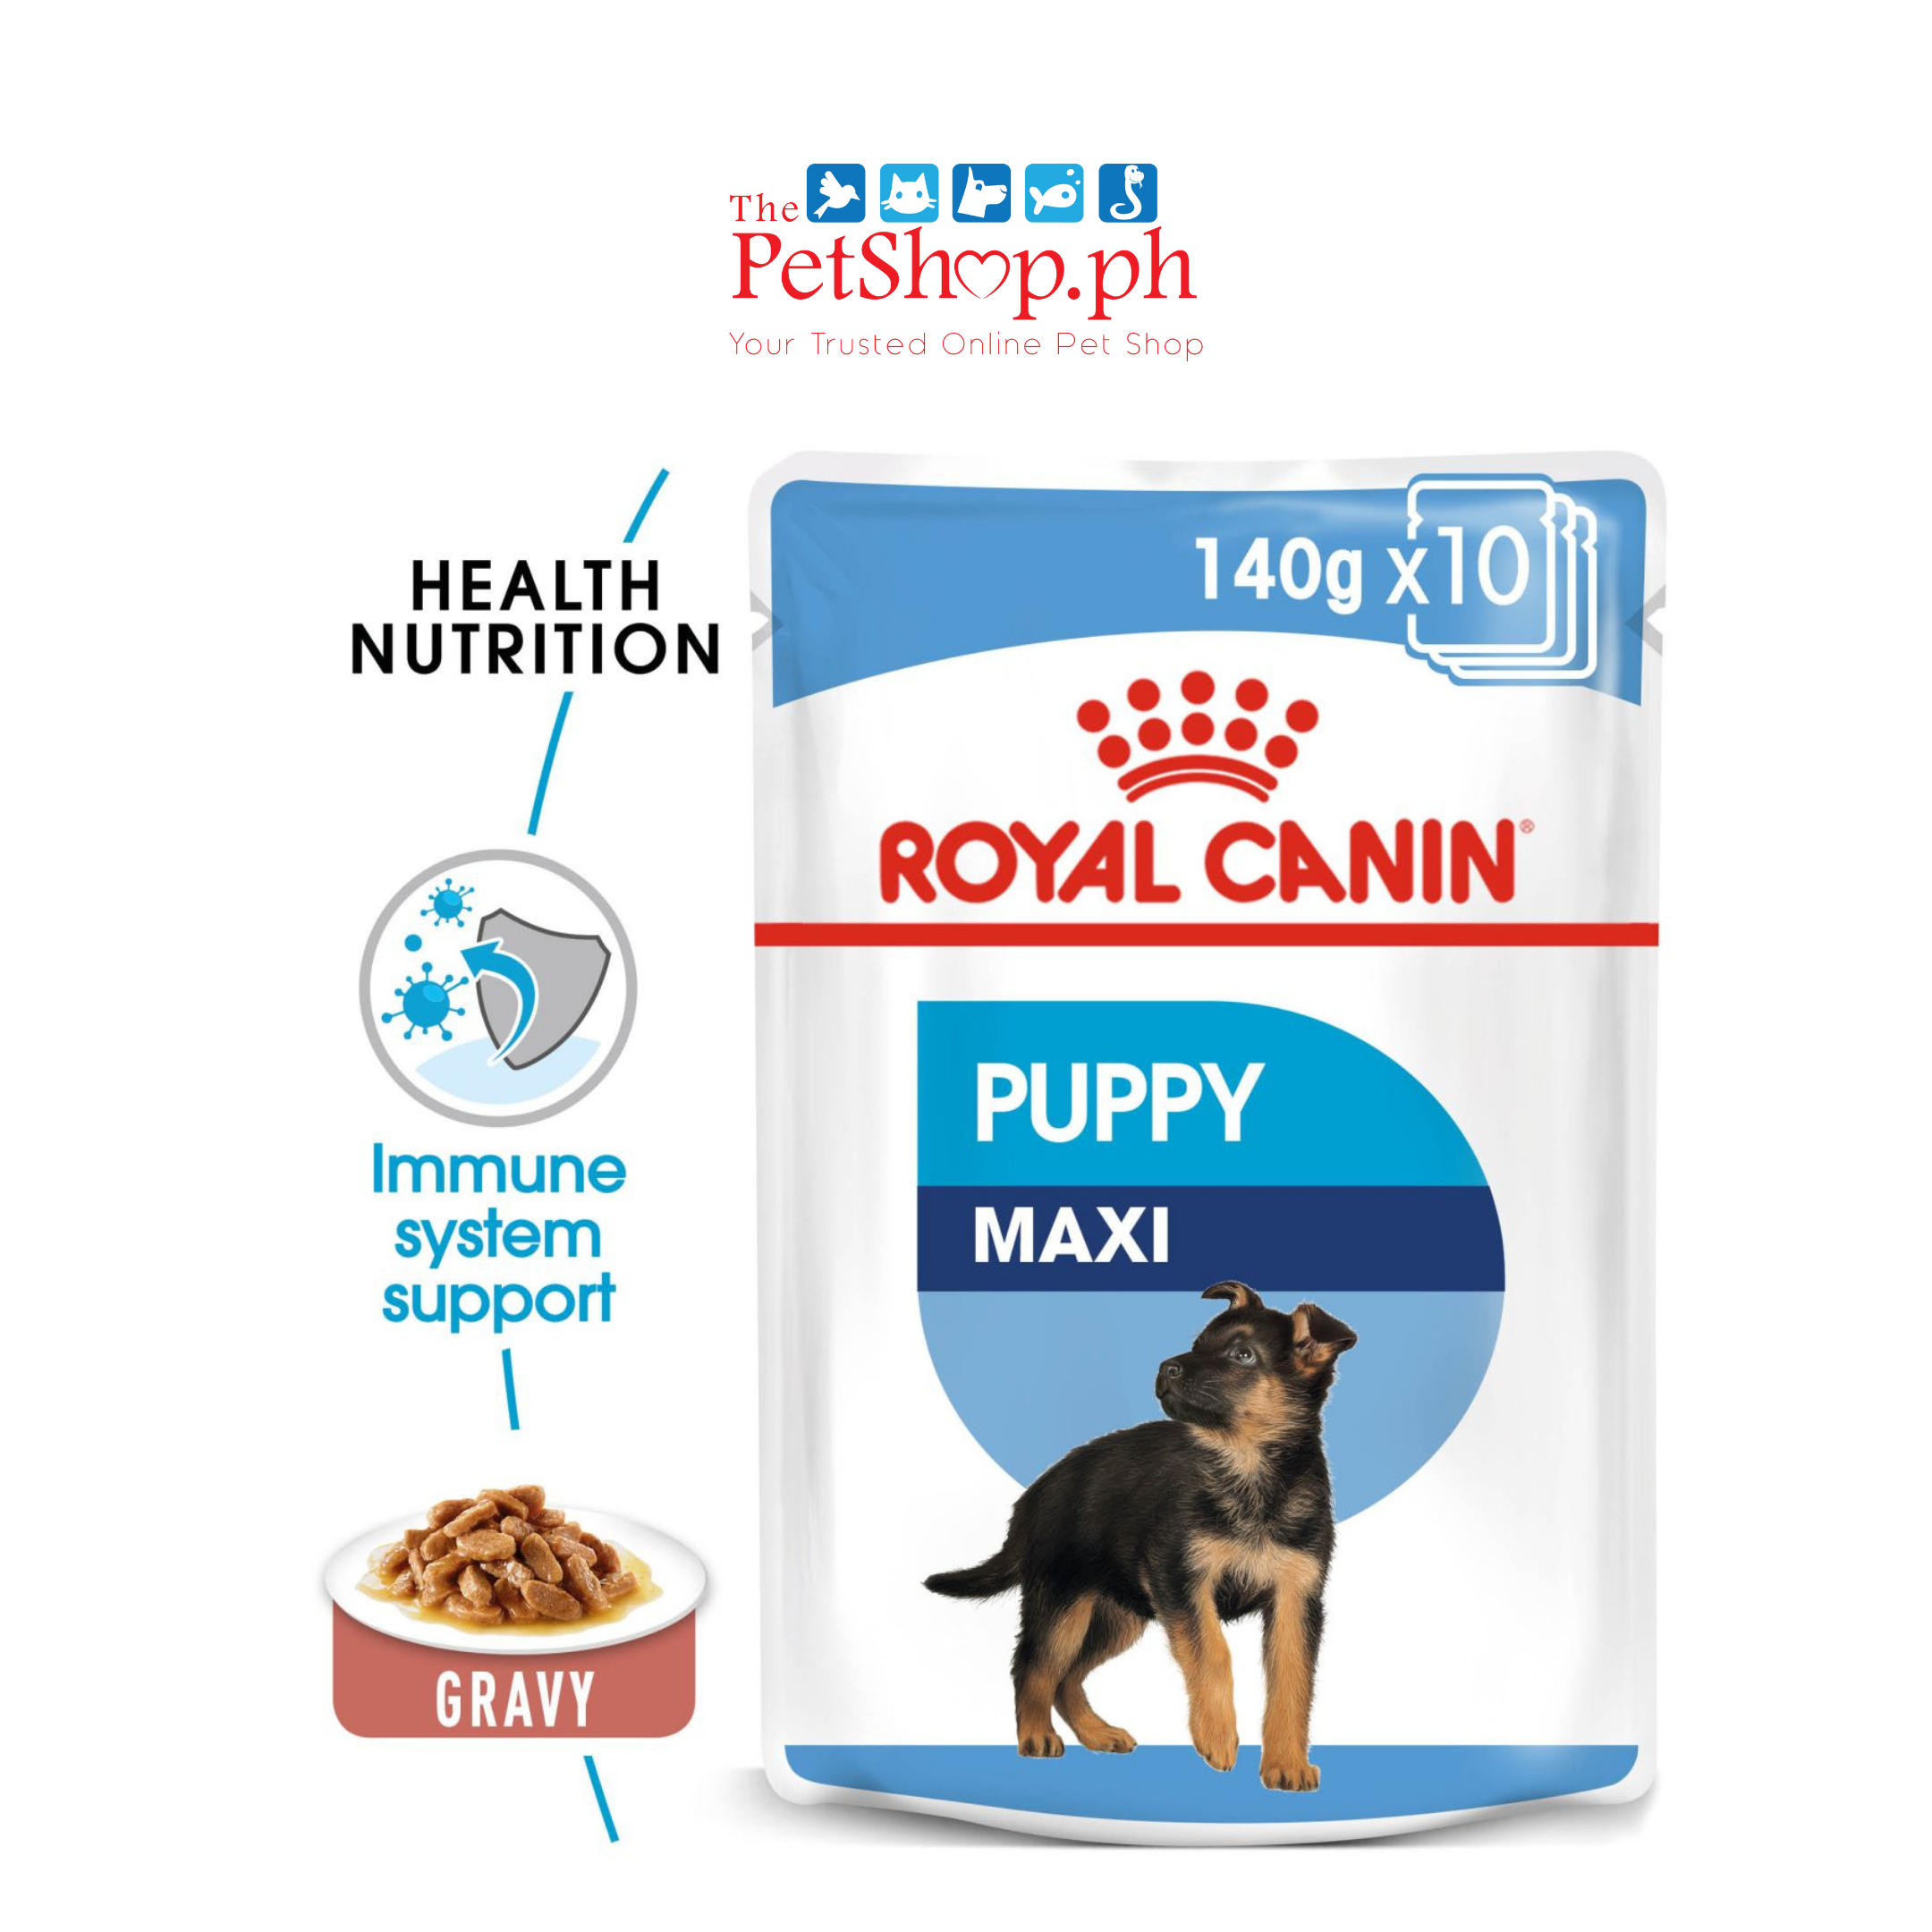 Royal Canin Maxi Puppy 140g Set of 10 Wet Dog Food - Size Health Nutrition